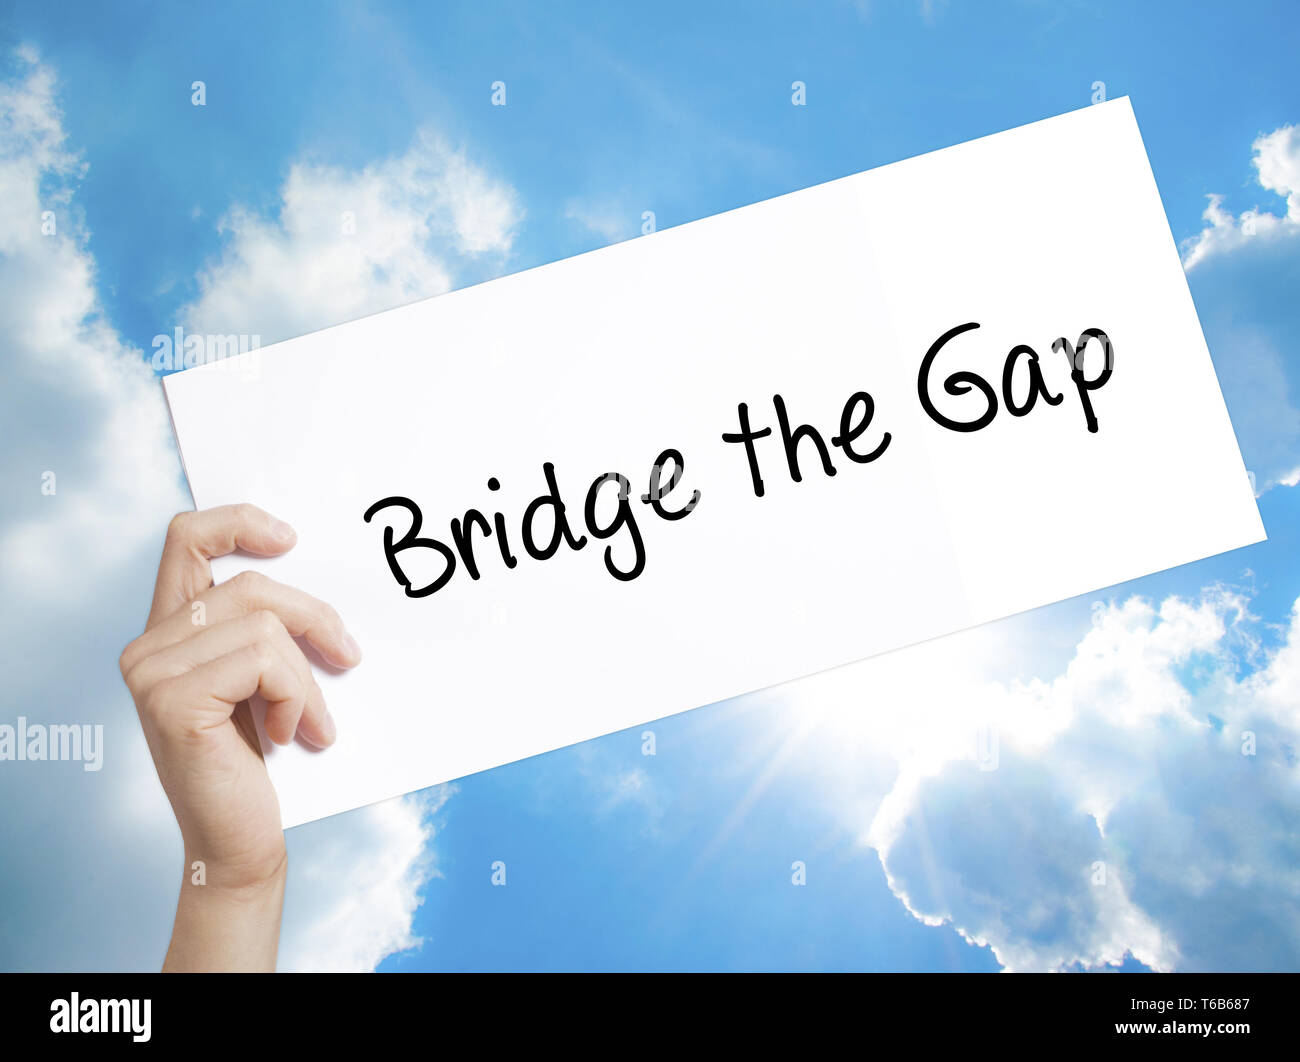 Bridge the Gap Sign on white paper. Man Hand Holding Paper with text. Isolated on sky background Stock Photo